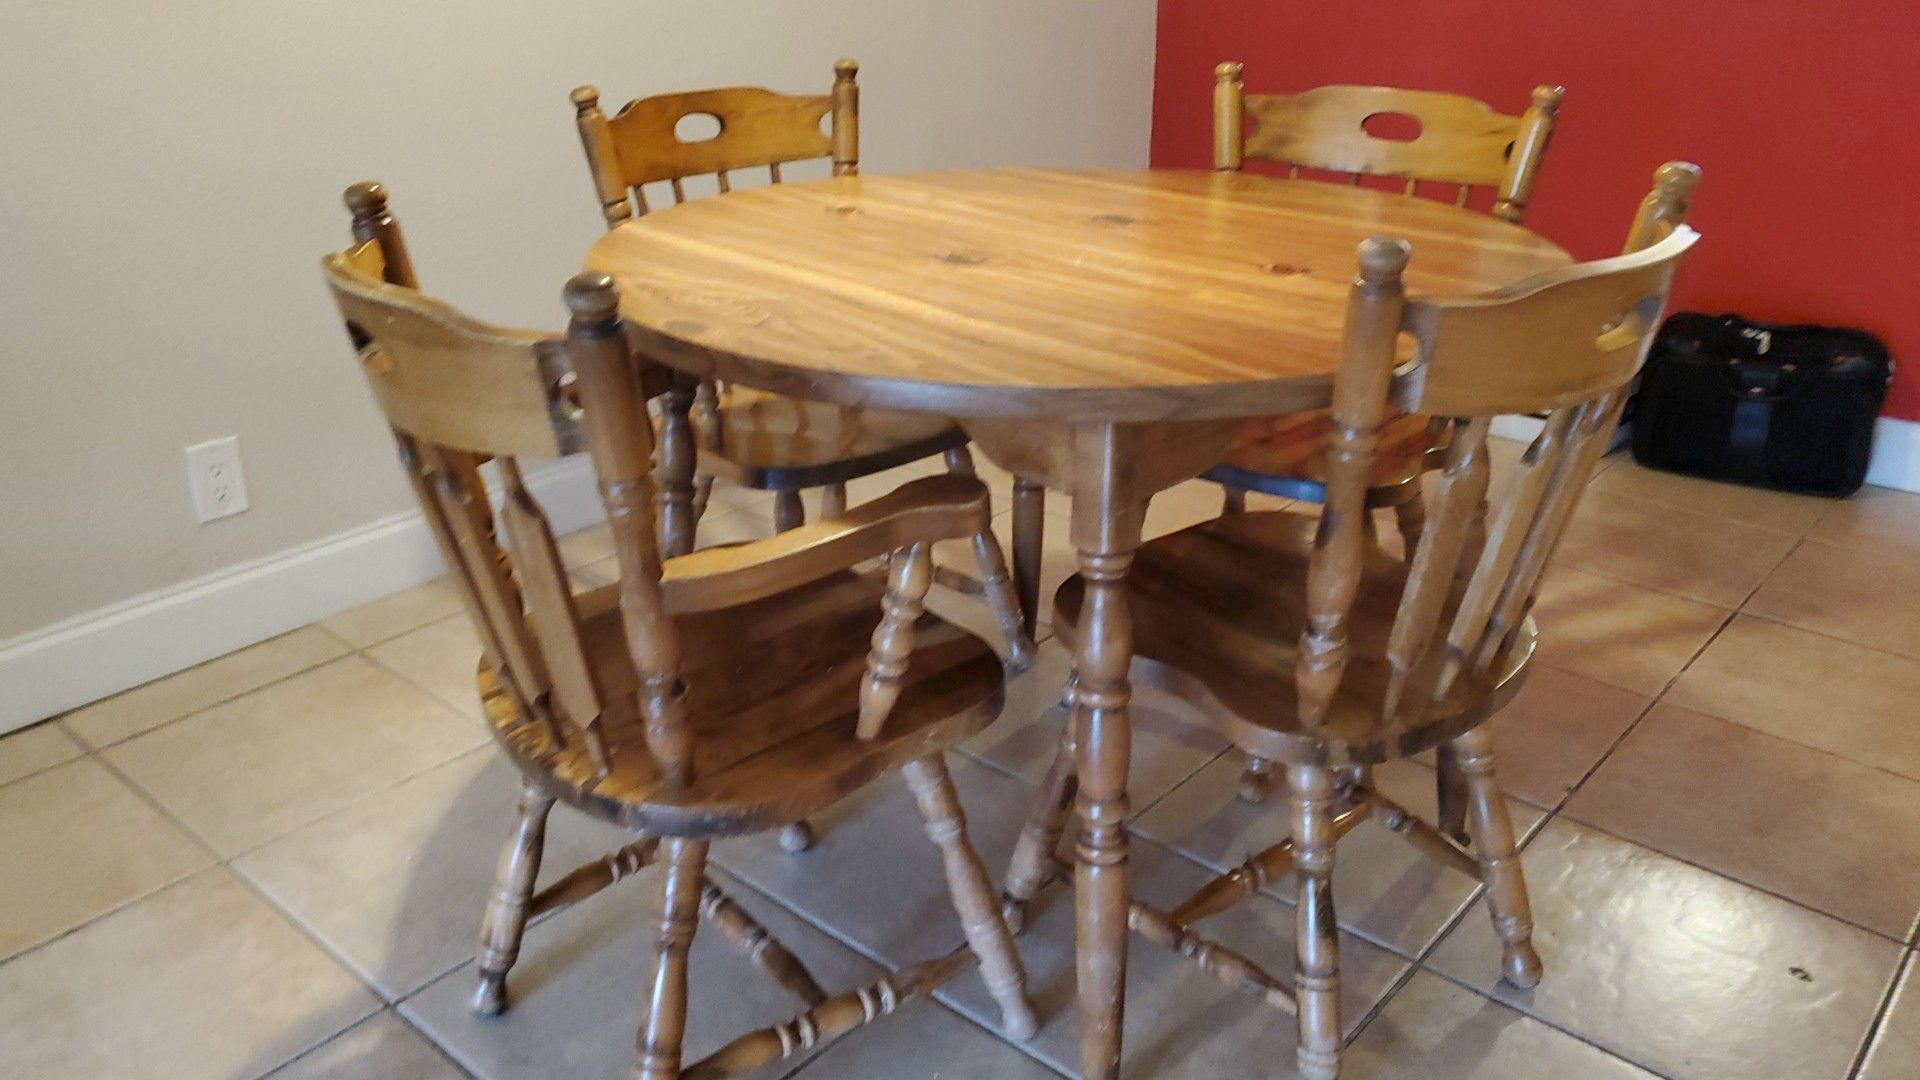 Kitchen table with 4 chairs, kitchen chairs